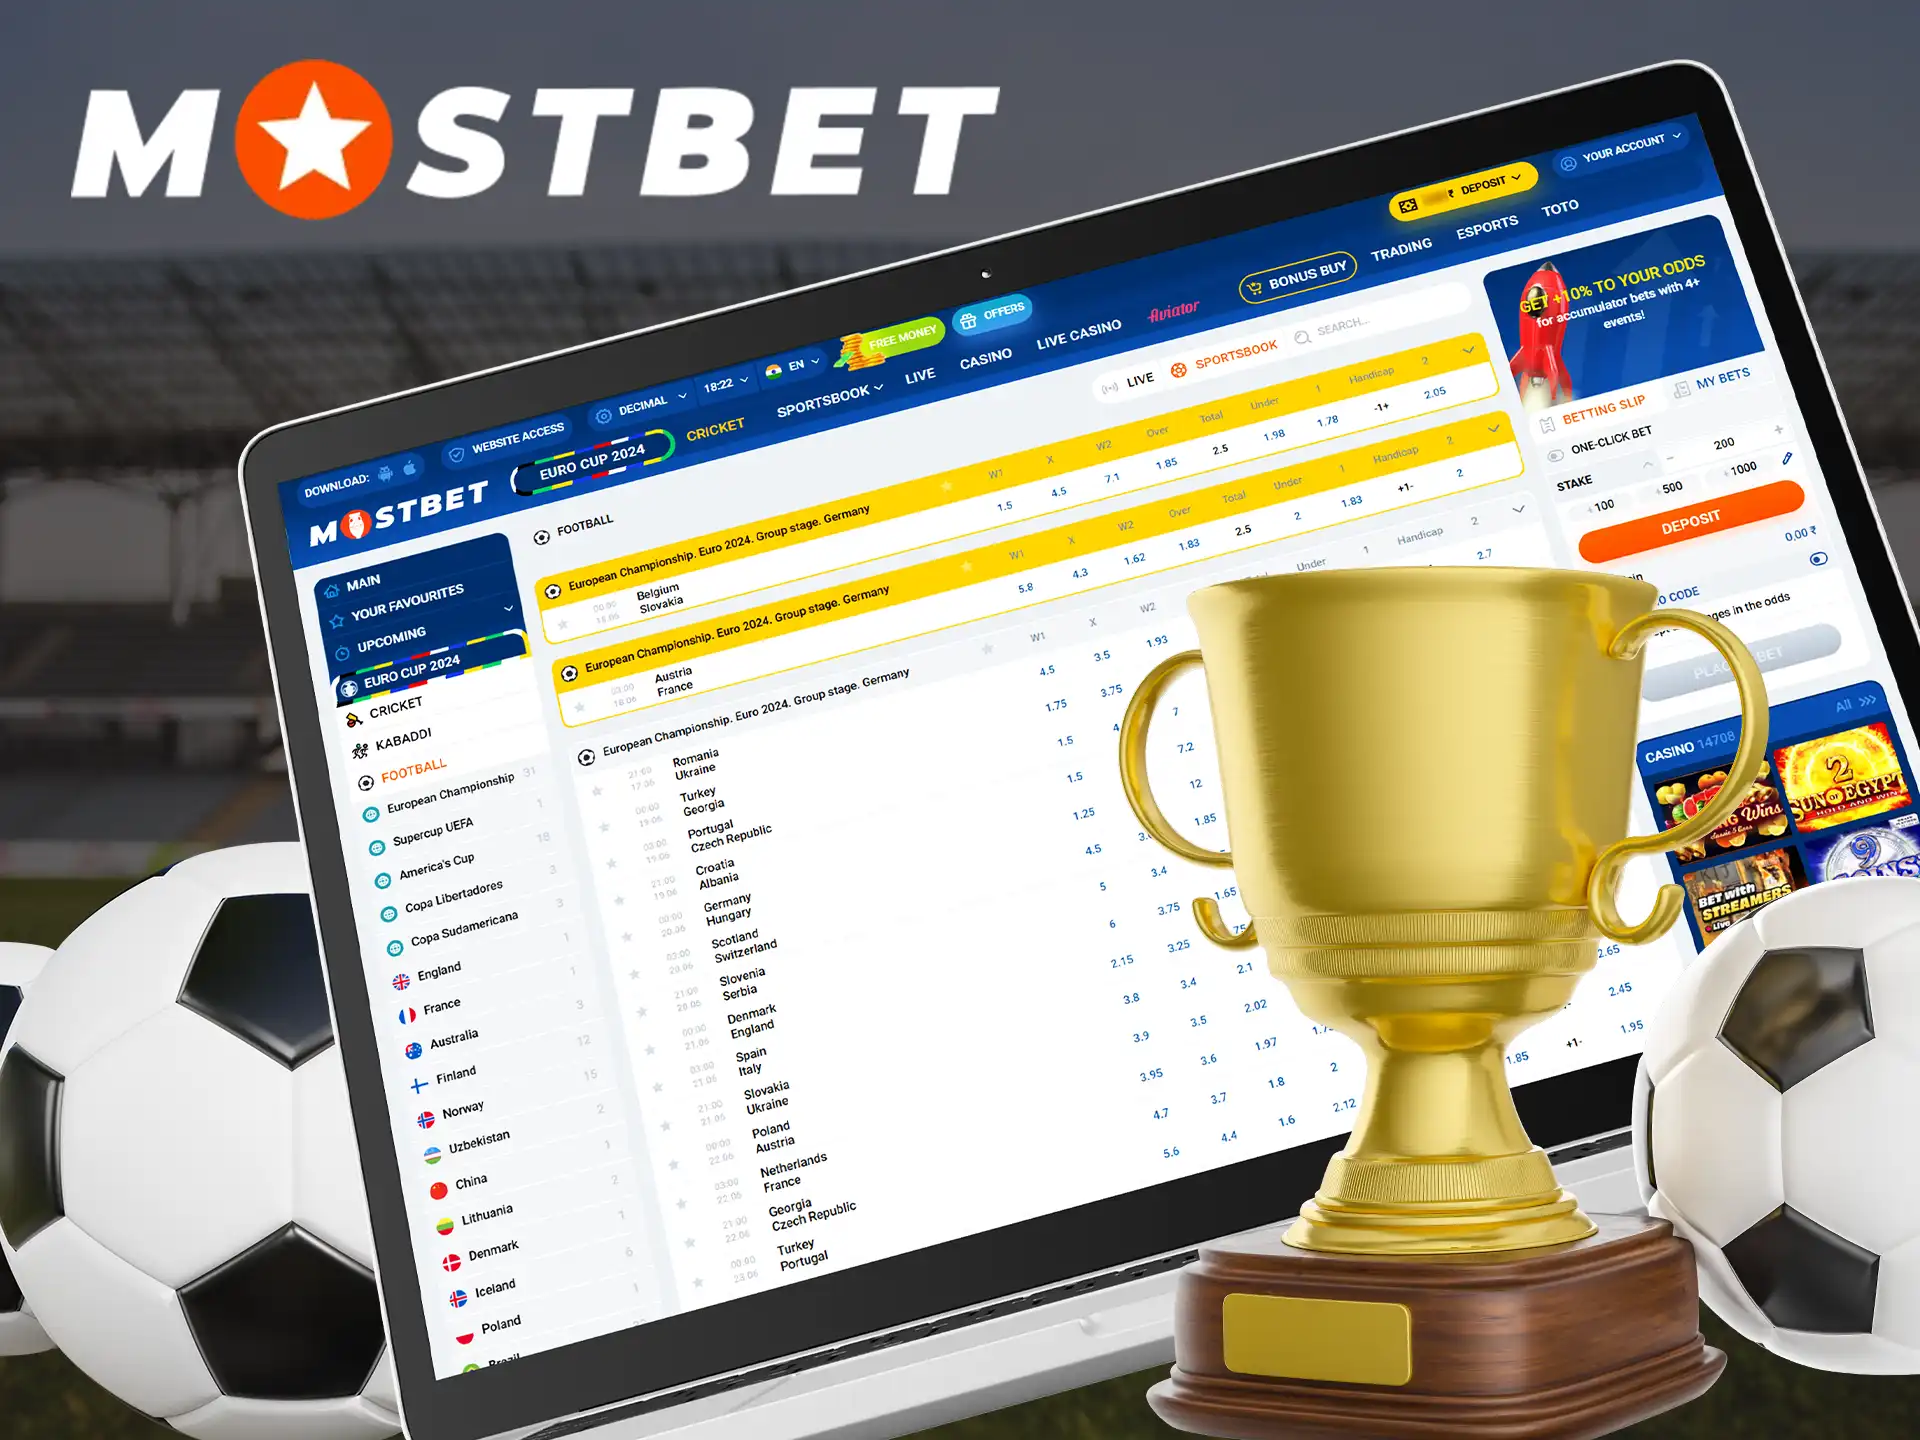 Popular football tournaments are represented at Mostbet.